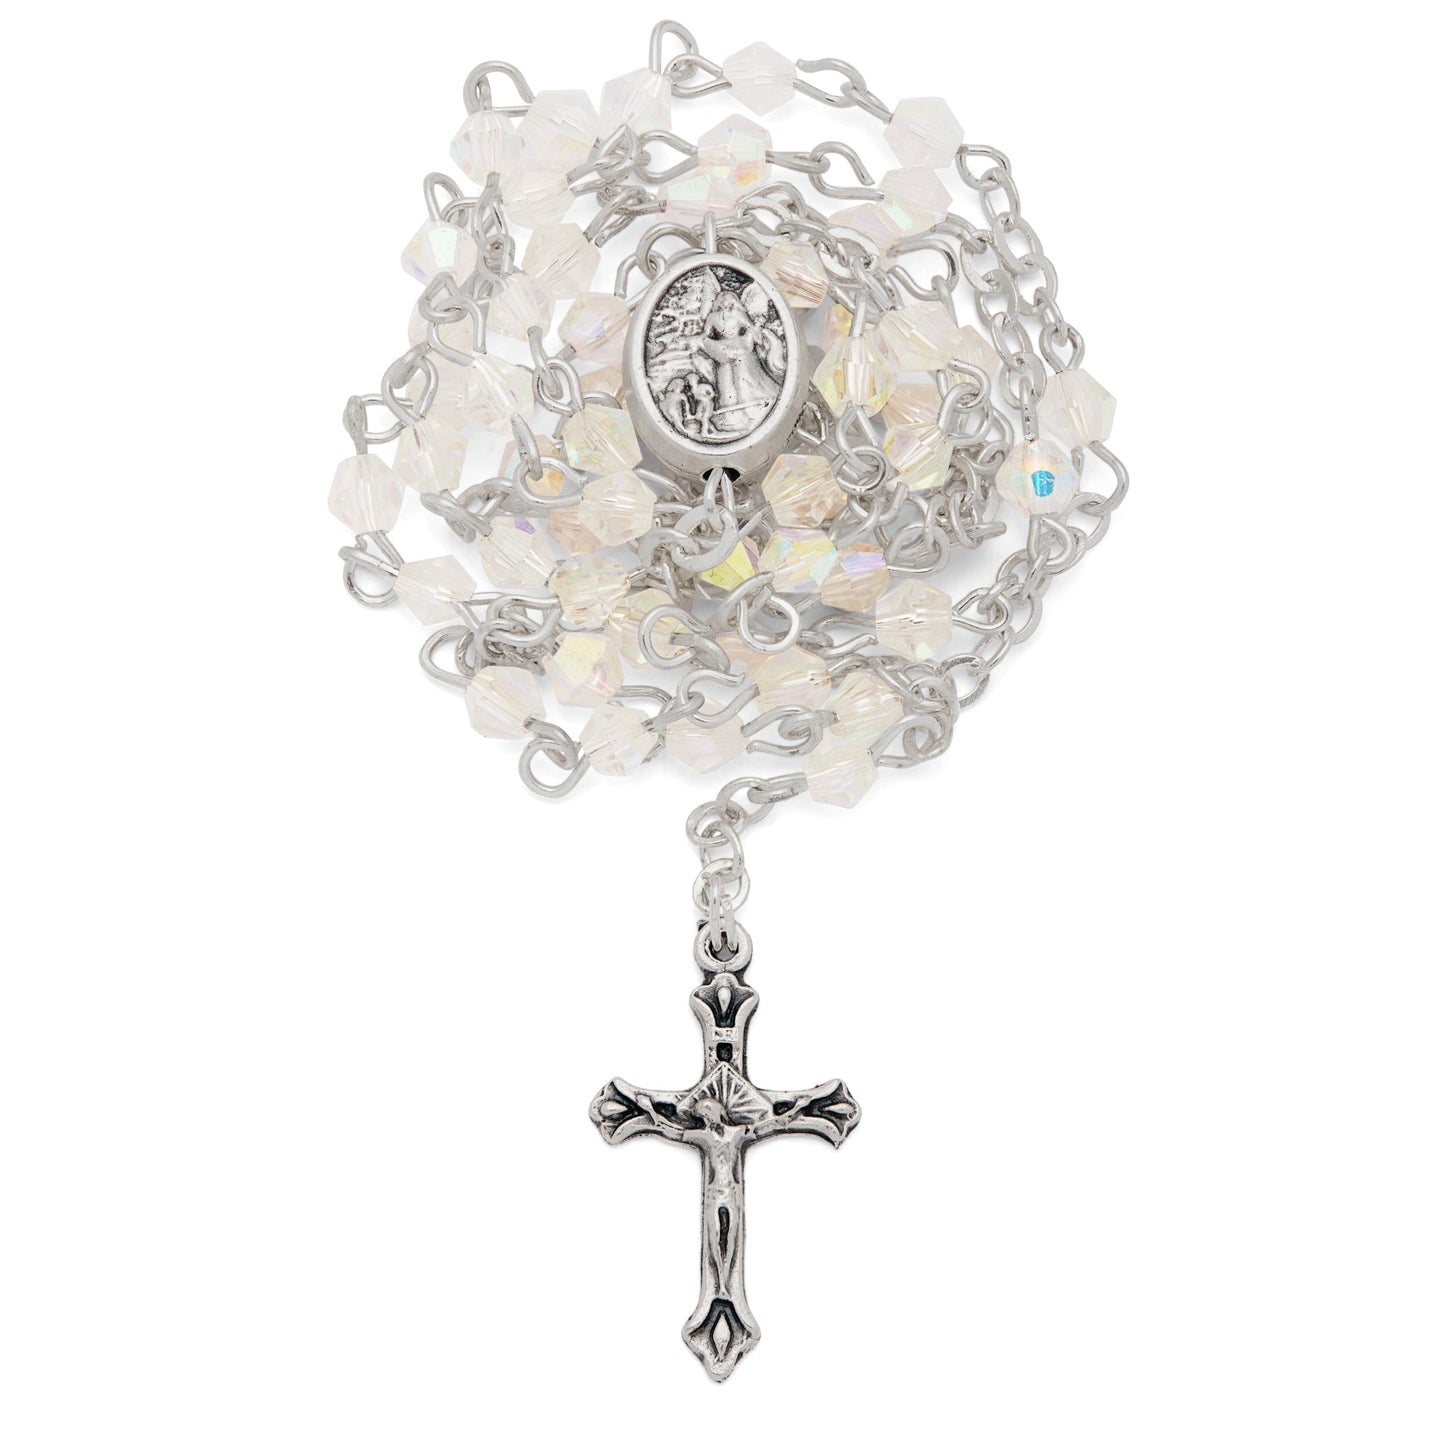 Mondo Cattolico Rosary Box 3.5x4 cm (1.38x1.57 in) / 3 mm (0.12 in) / 37.5 cm (14.76 in) Small White Enameled St. Michael Rosary Case With White Crystal Rosary